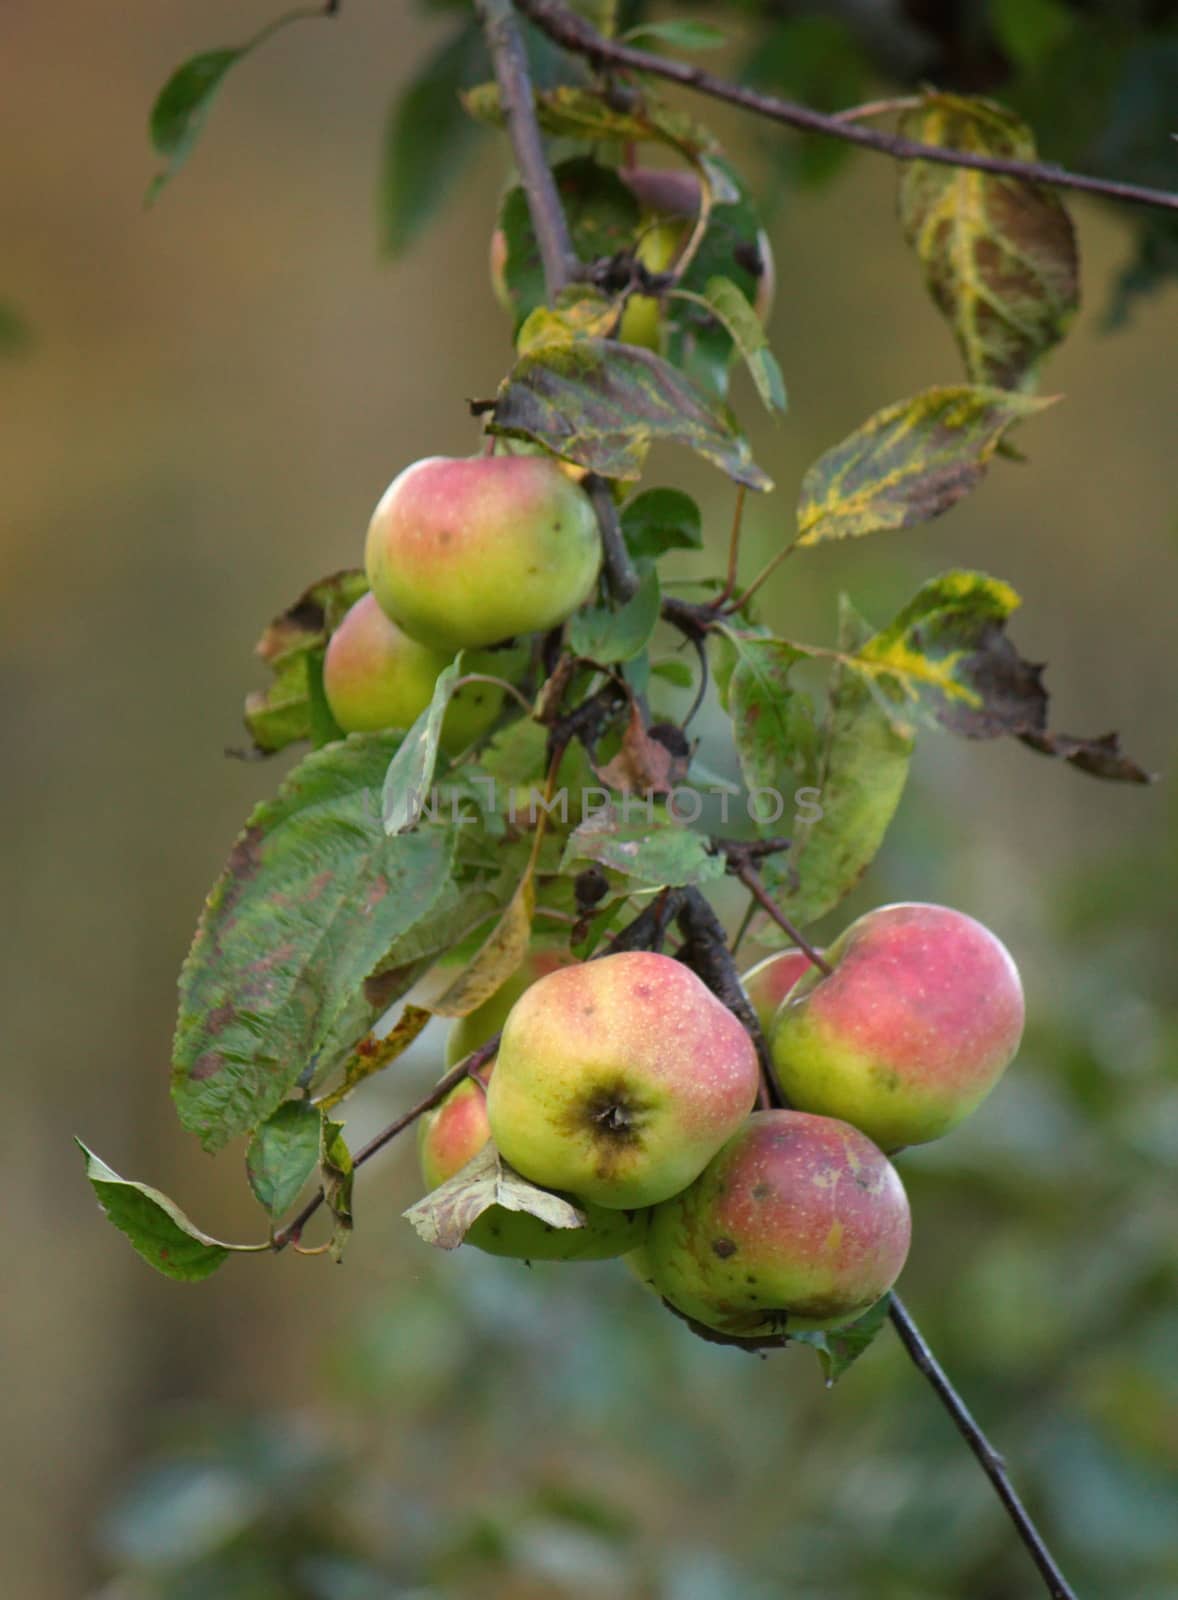 Red and green apples (malus domestica) on tree